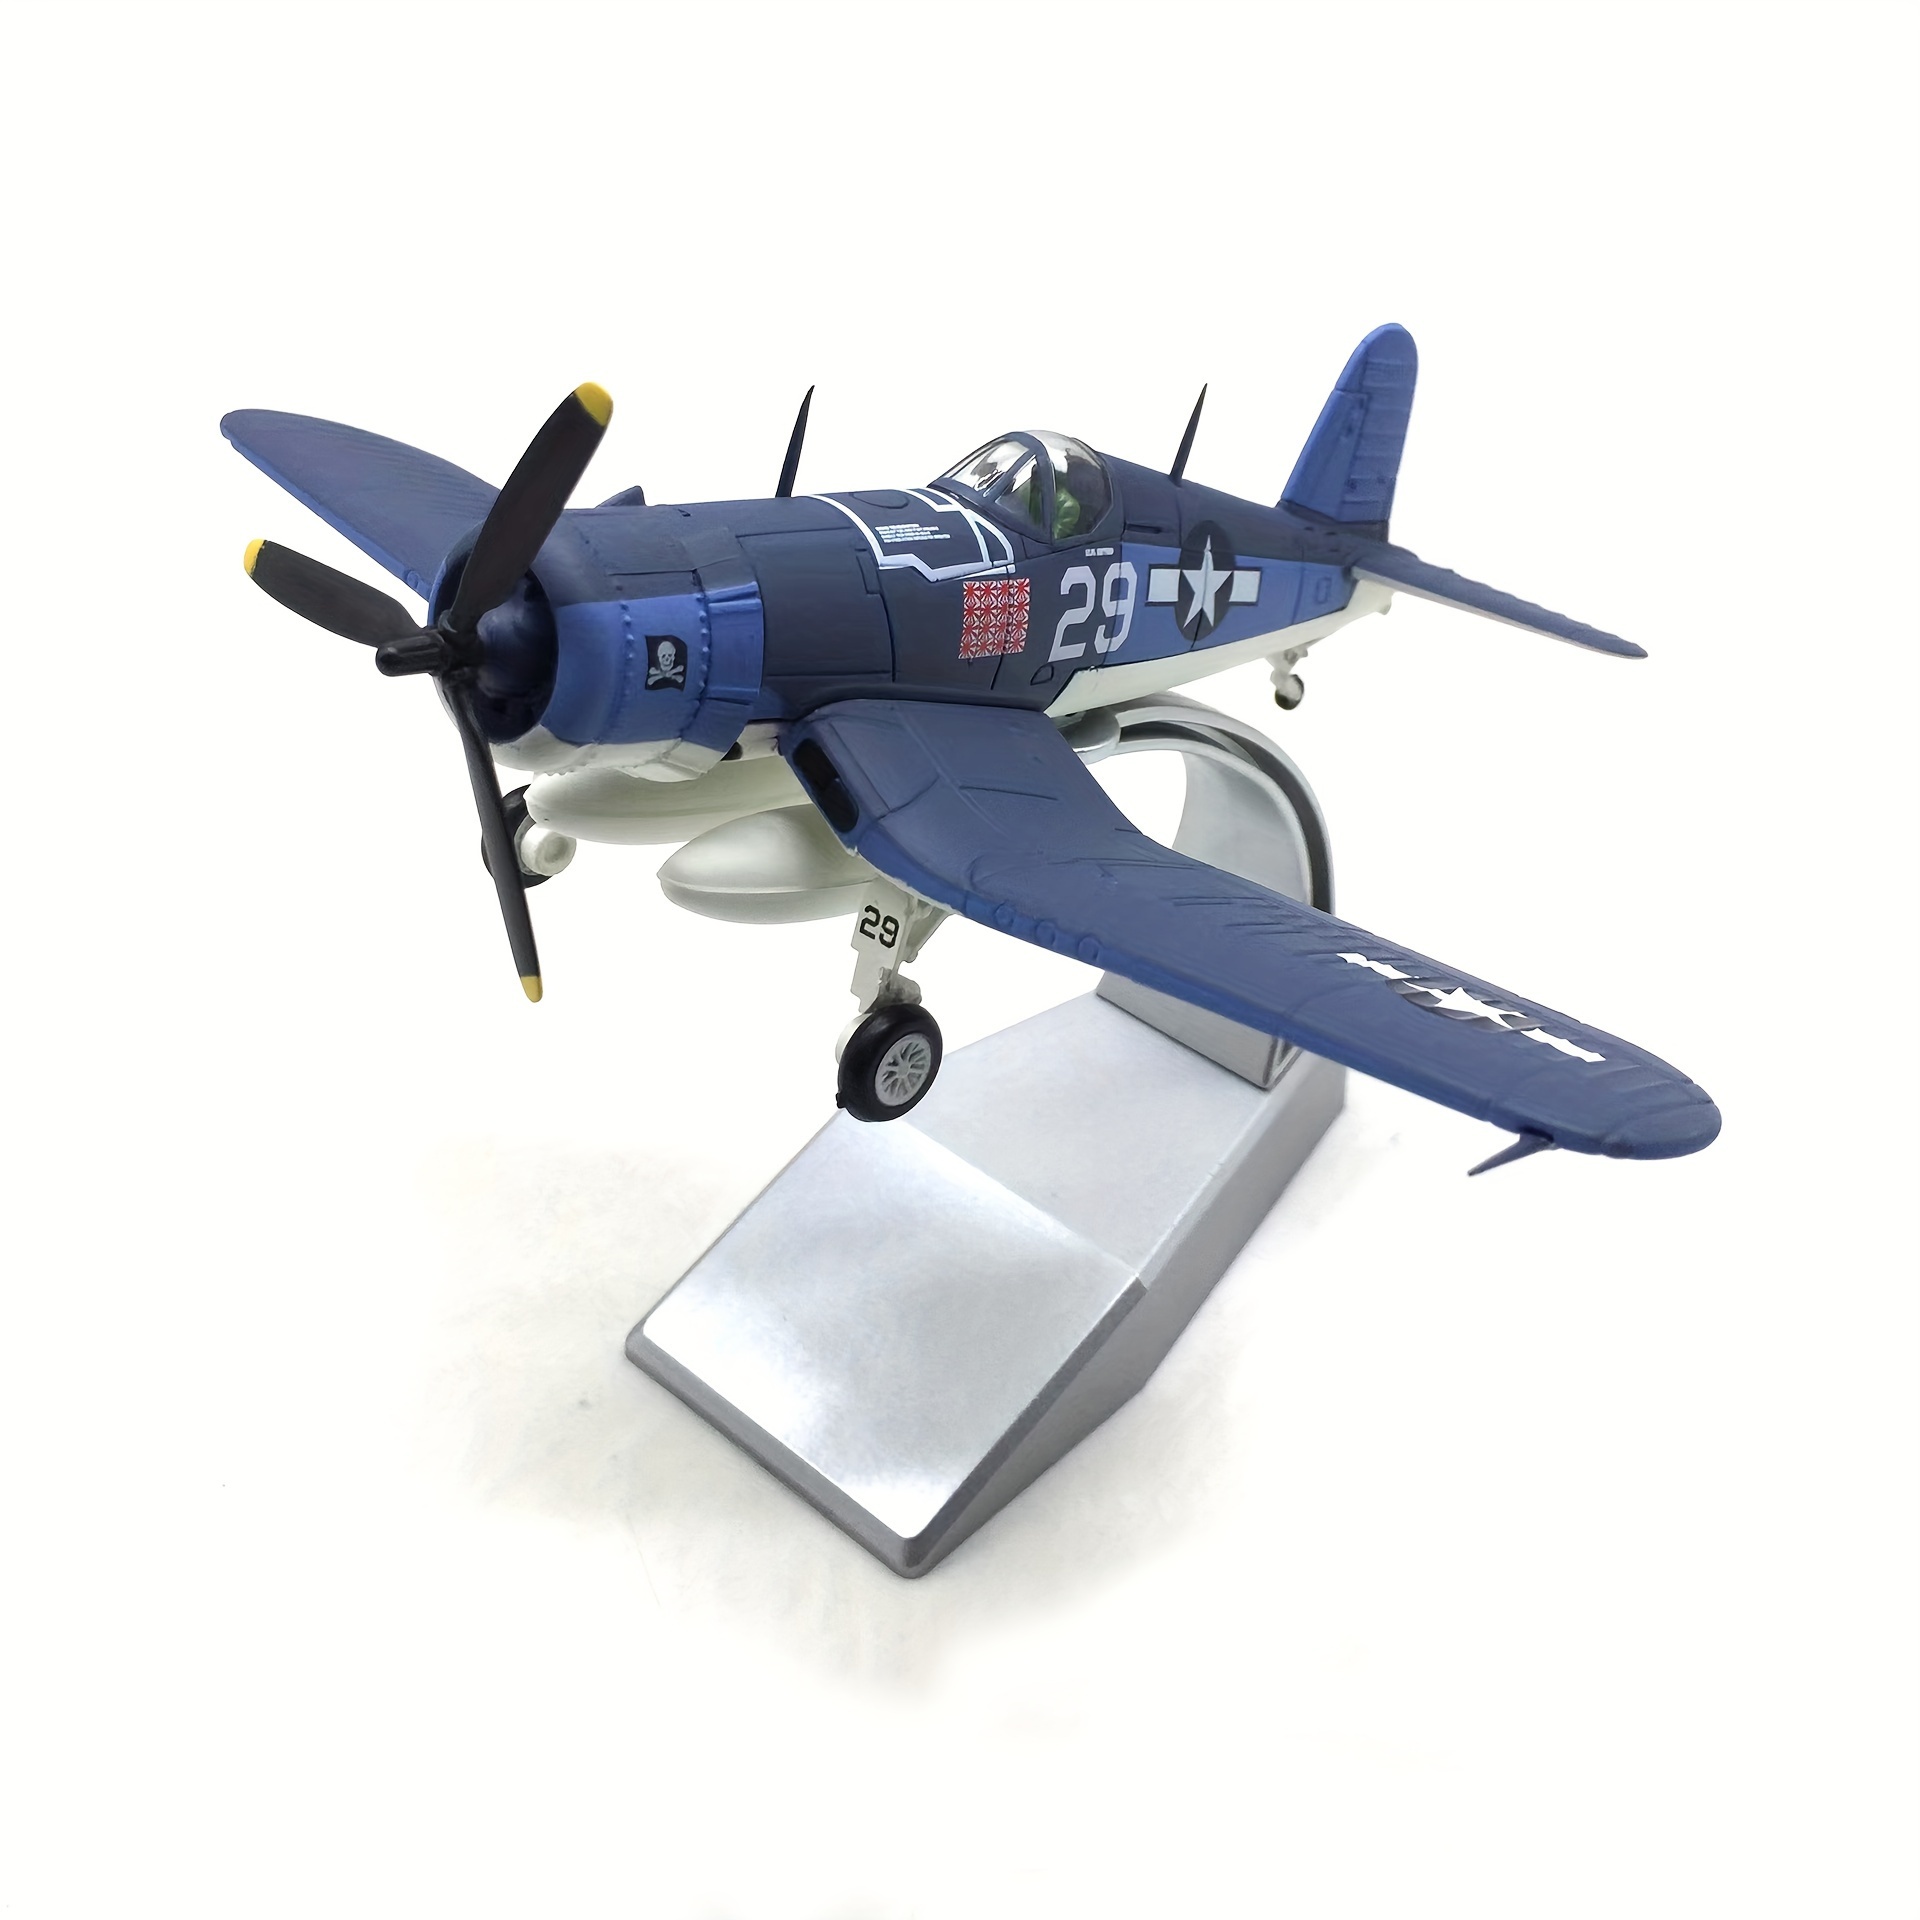 

1/72 Scale Diecast Metal Model - Carrier & Land-based Fighter Aircraft Display, Collectible Gift For Ages 14+